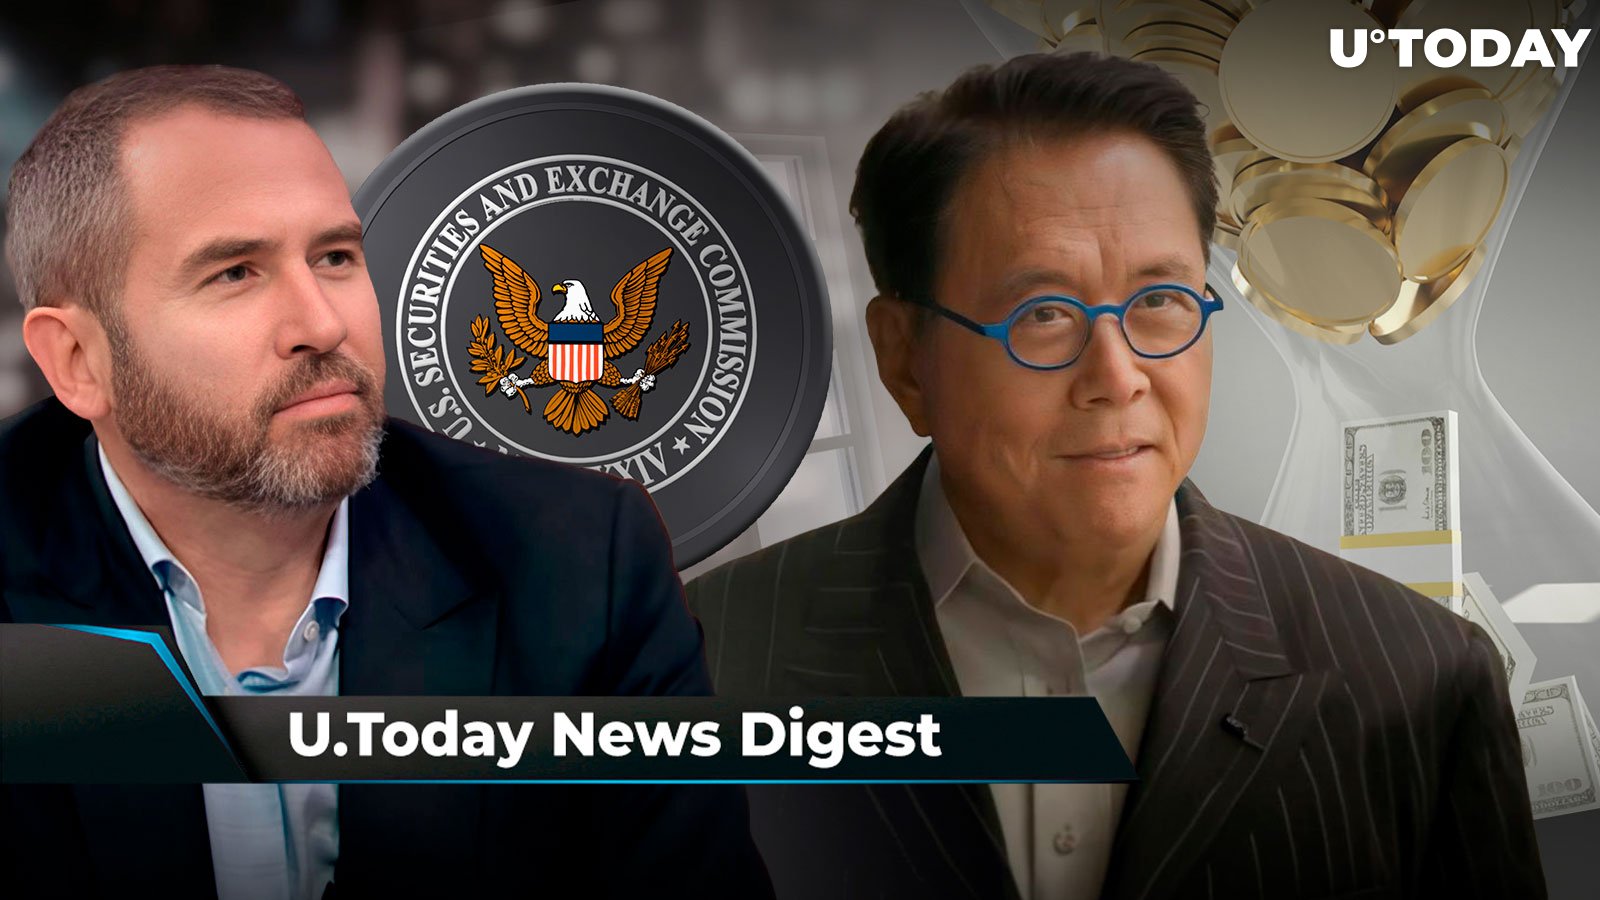 Ripple CEO Expects Legal Battle With SEC to Be Over 'Very Soon,' Robert Kiyosaki Shares Best Time to Get Rich, WazirX Announces Major Bounty to Recover Stolen Funds: Crypto News Digest by U.Today